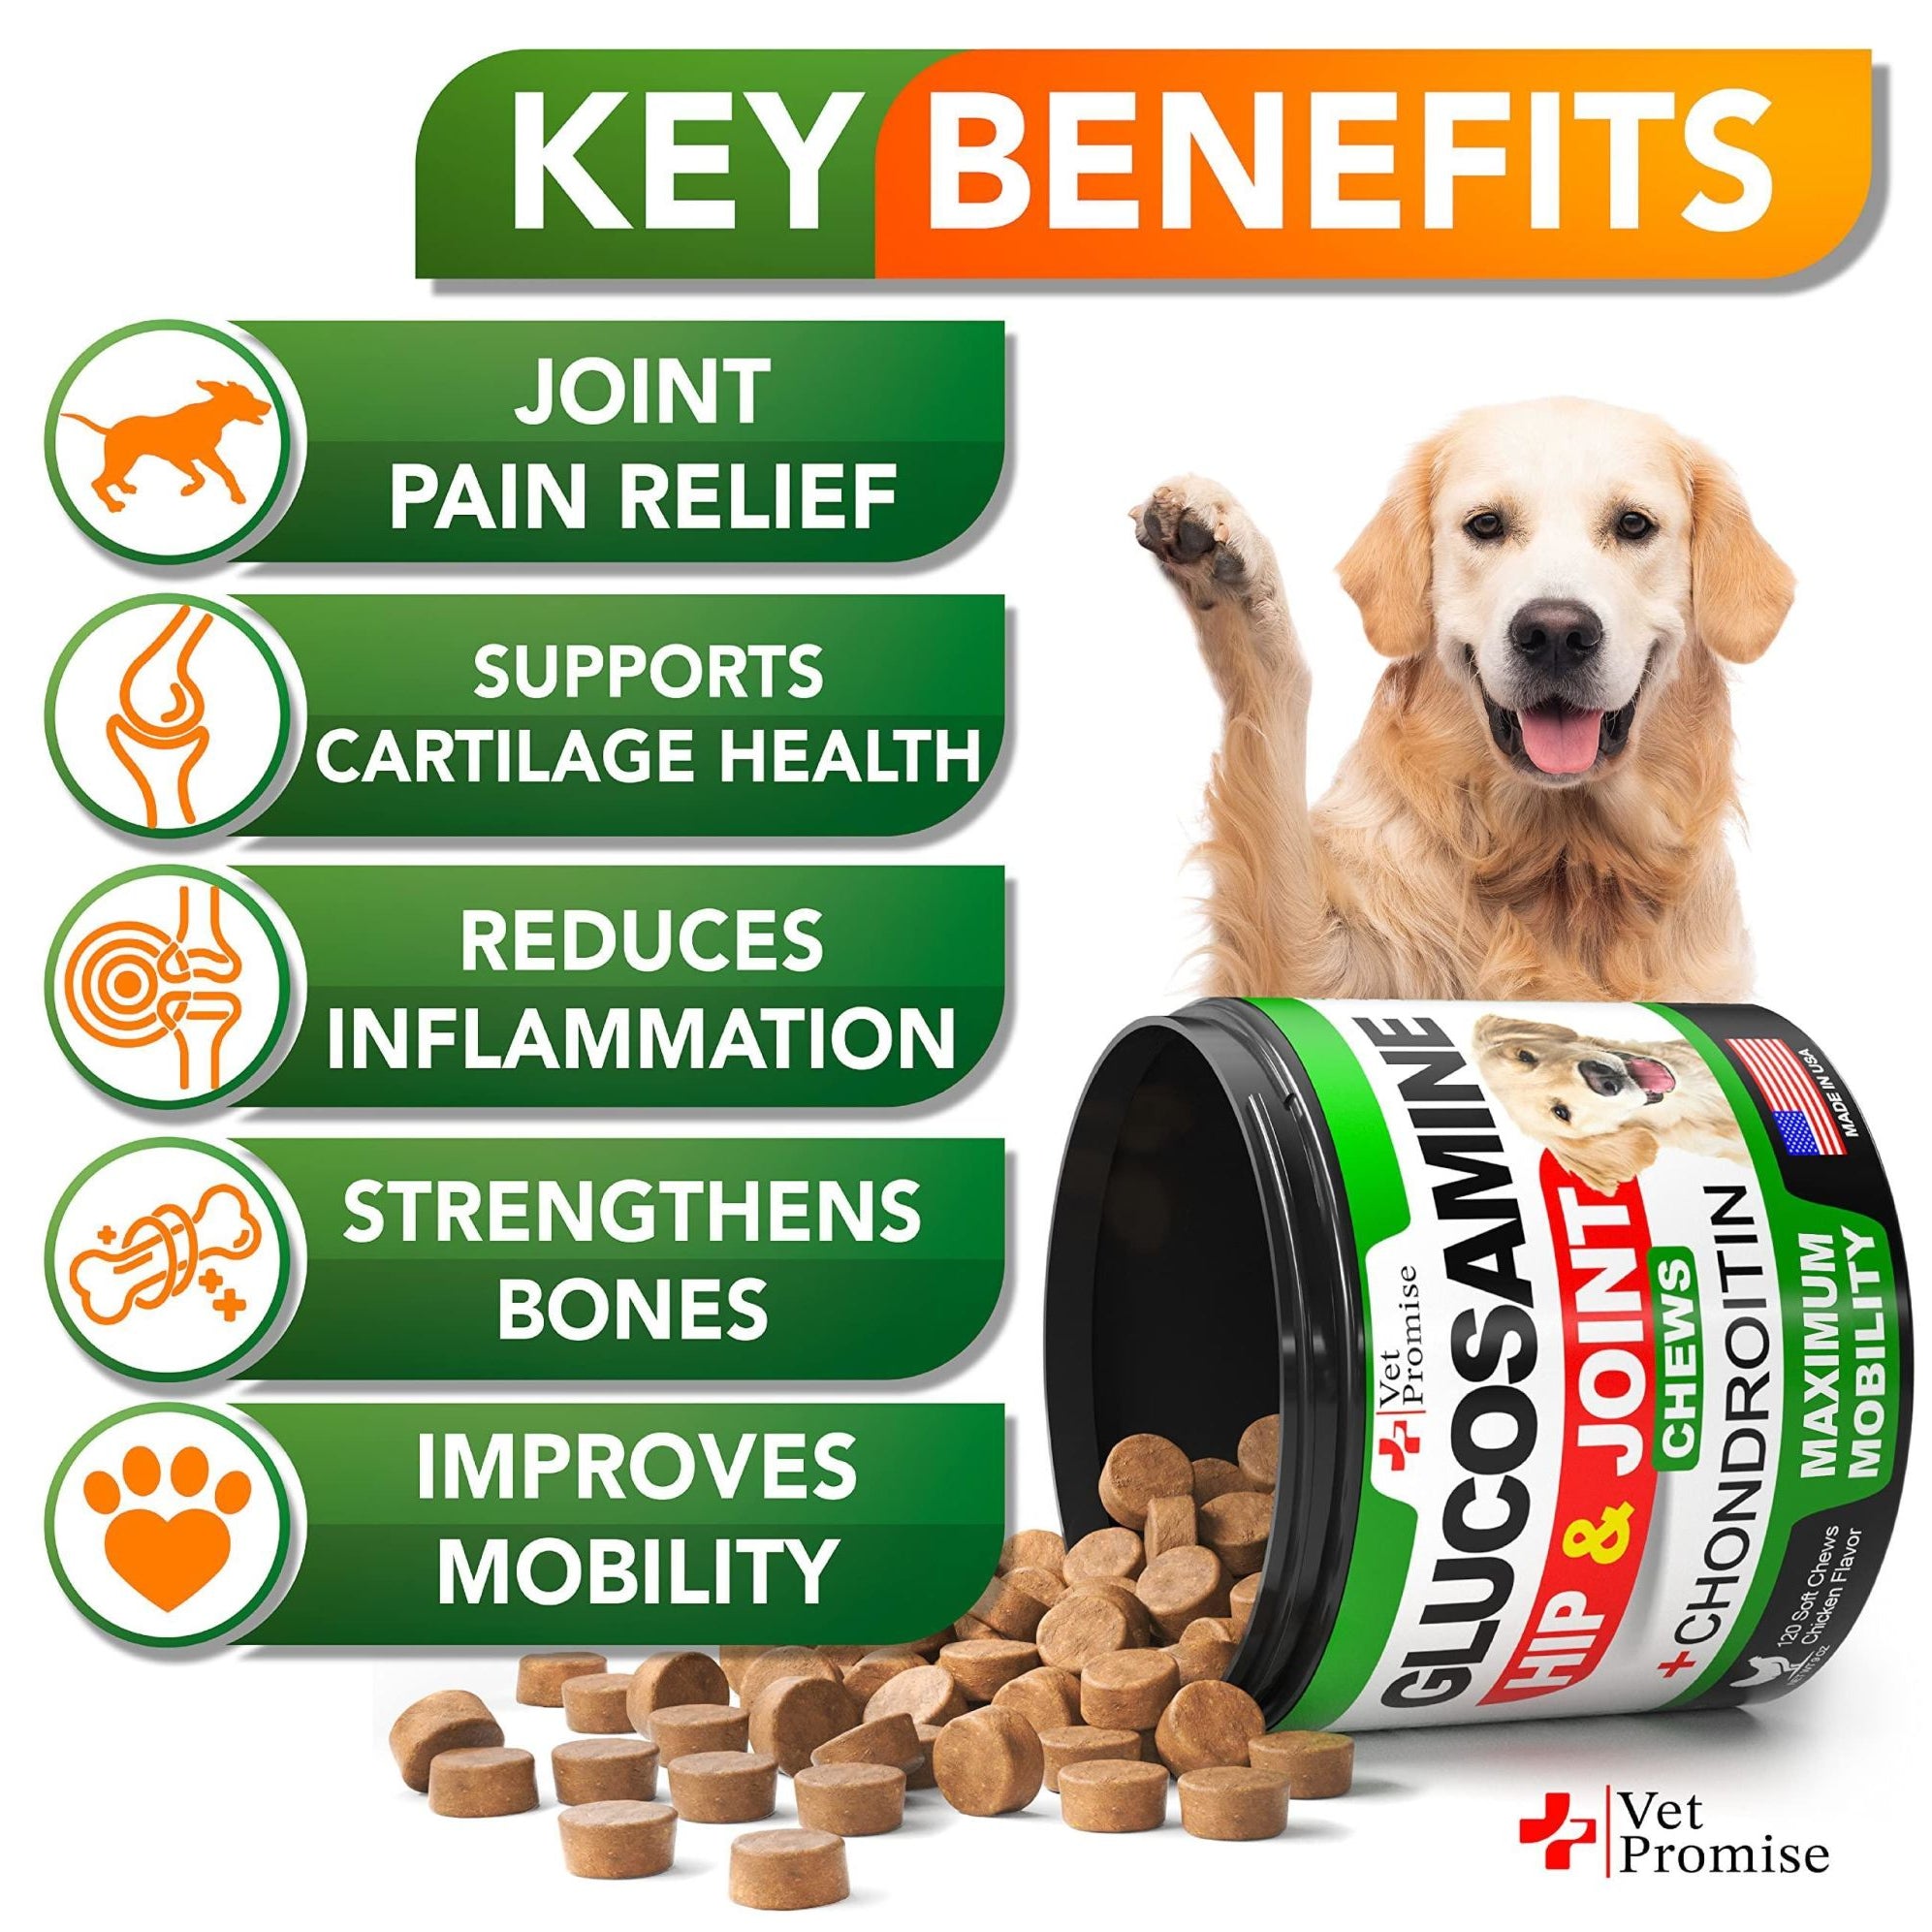 Glucosamine Hip and Joint Supplement Chondroitin for Dogs